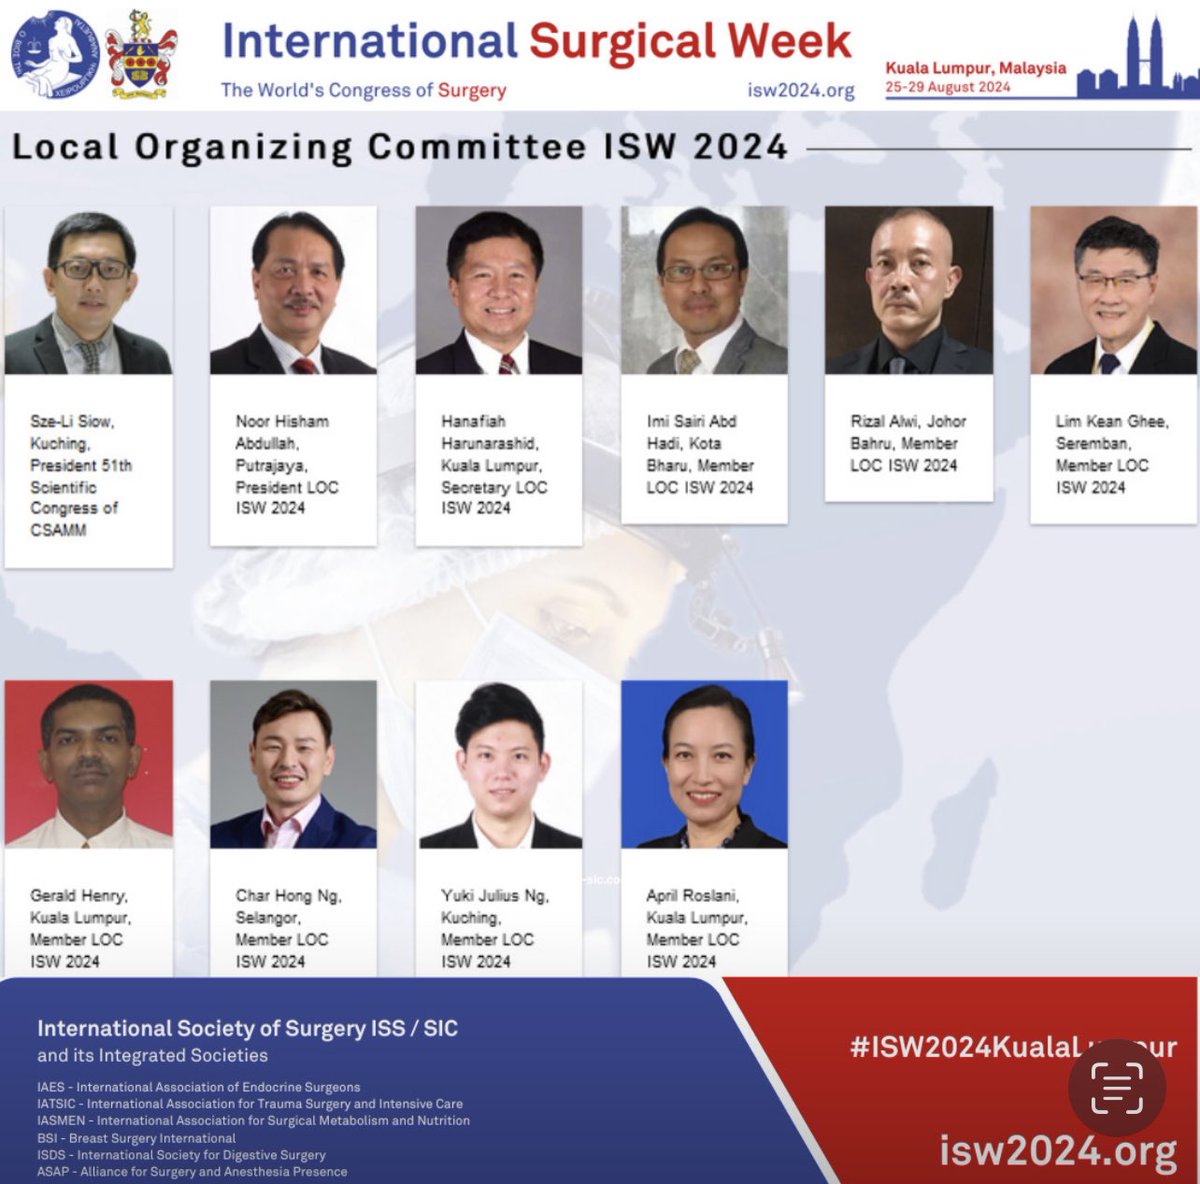 🚀 meet the Local Organizing Committee - looking forward to welcoming you at the ISW 2024 taking place 25 - 29 August 2024 in Kuala Lumpur, Malaysia 
#ISW2024KualaLumpur #ISW2024 #surgicalcongress #some4surgery #surgtweeting #isssic